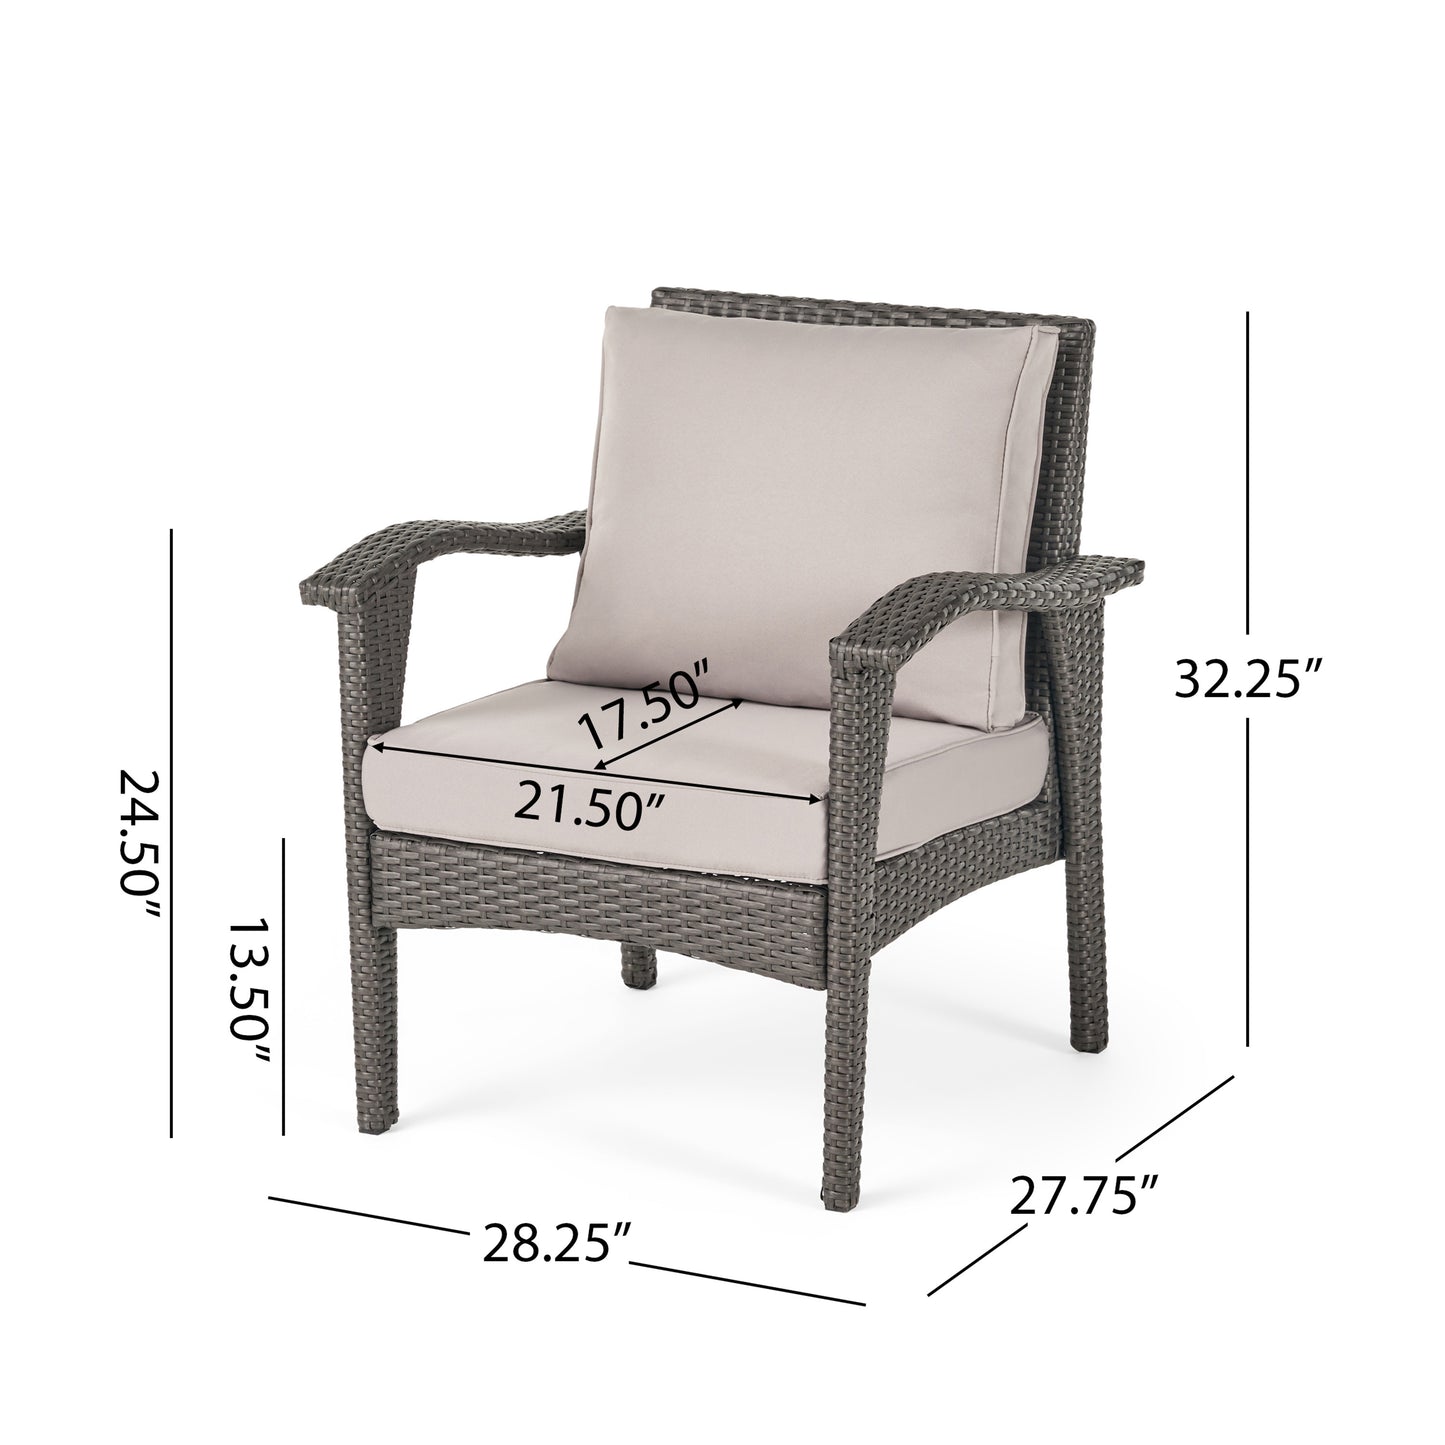 Mckynzie Outdoor 4 Seater Wicker Chat Set with Fire Pit